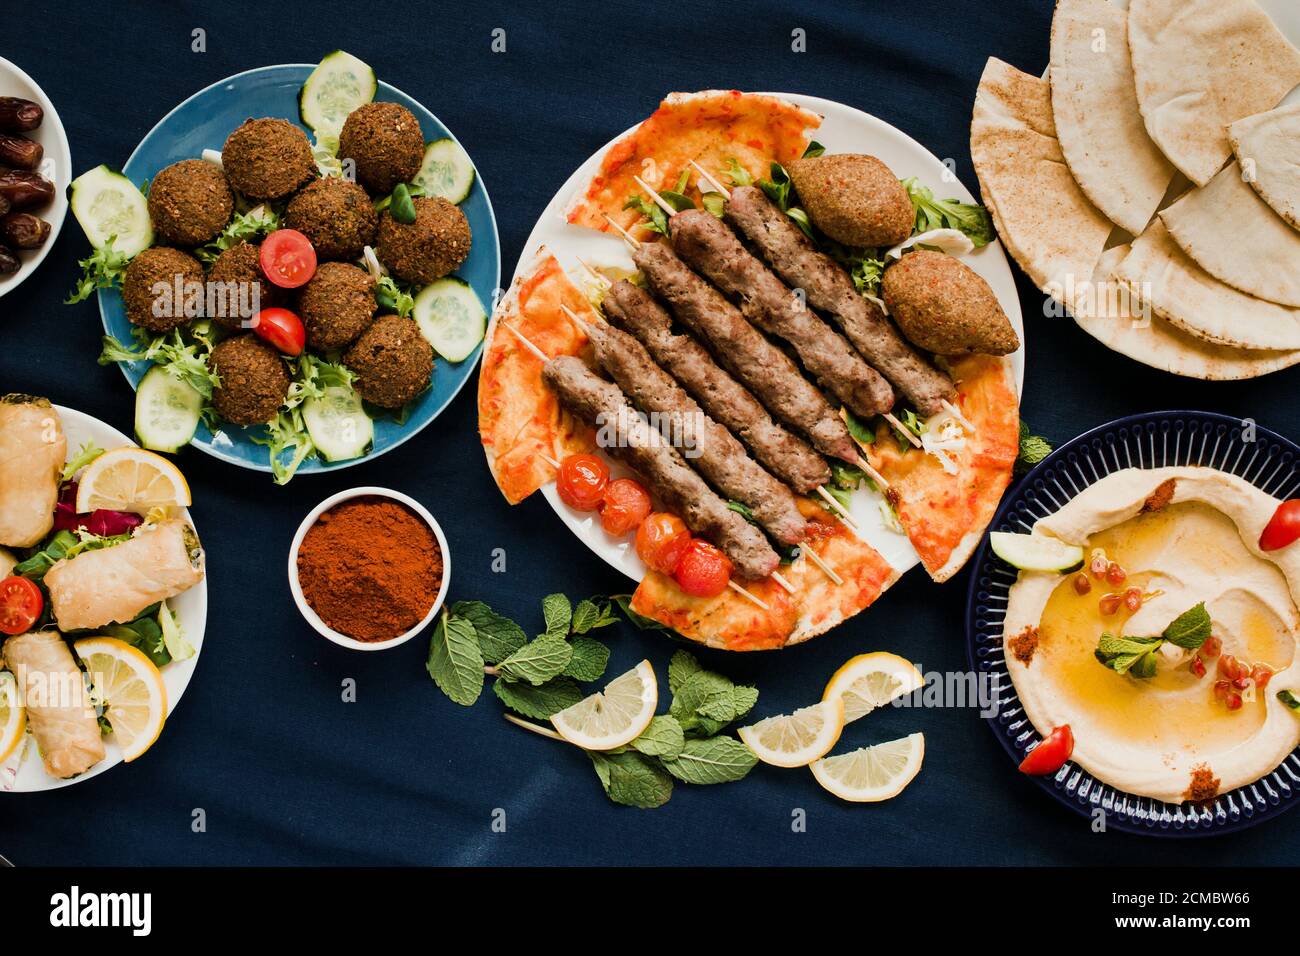 Middle Eastern food: typical dishes Stock Photo